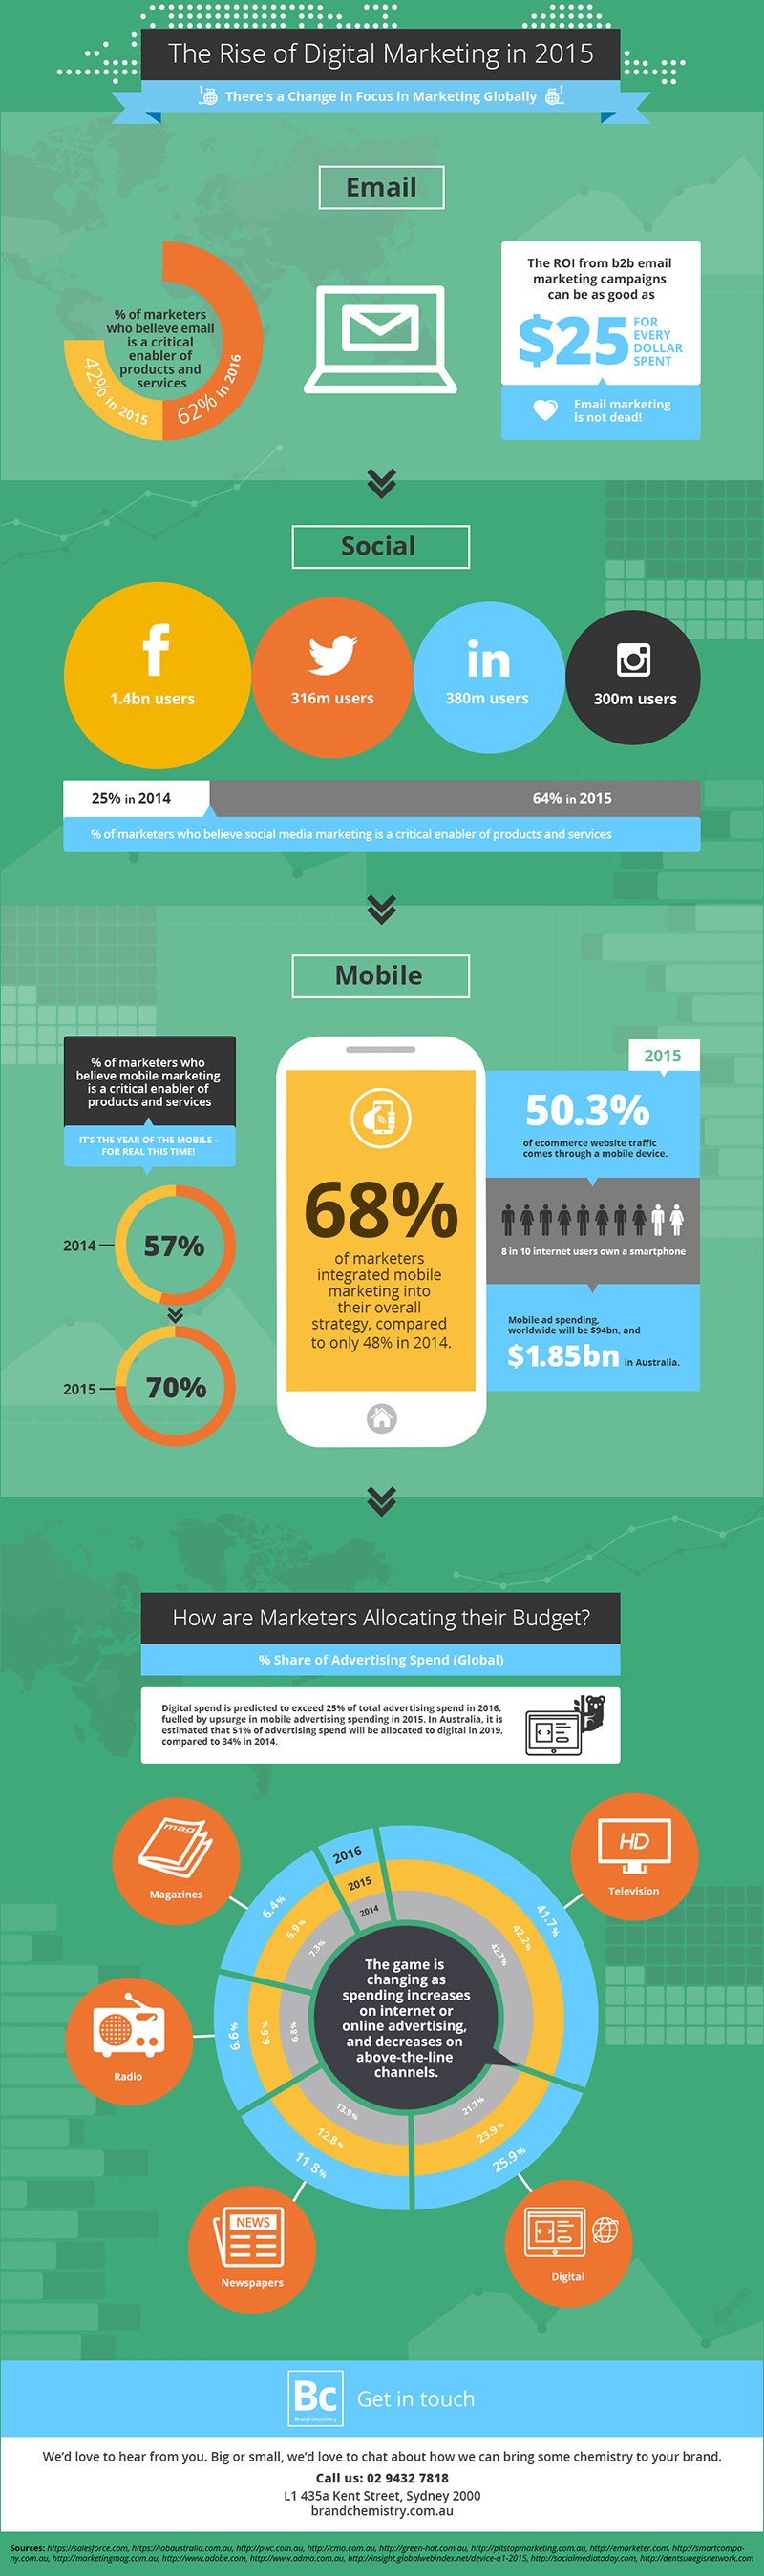 The rise of digital marketing in 2015